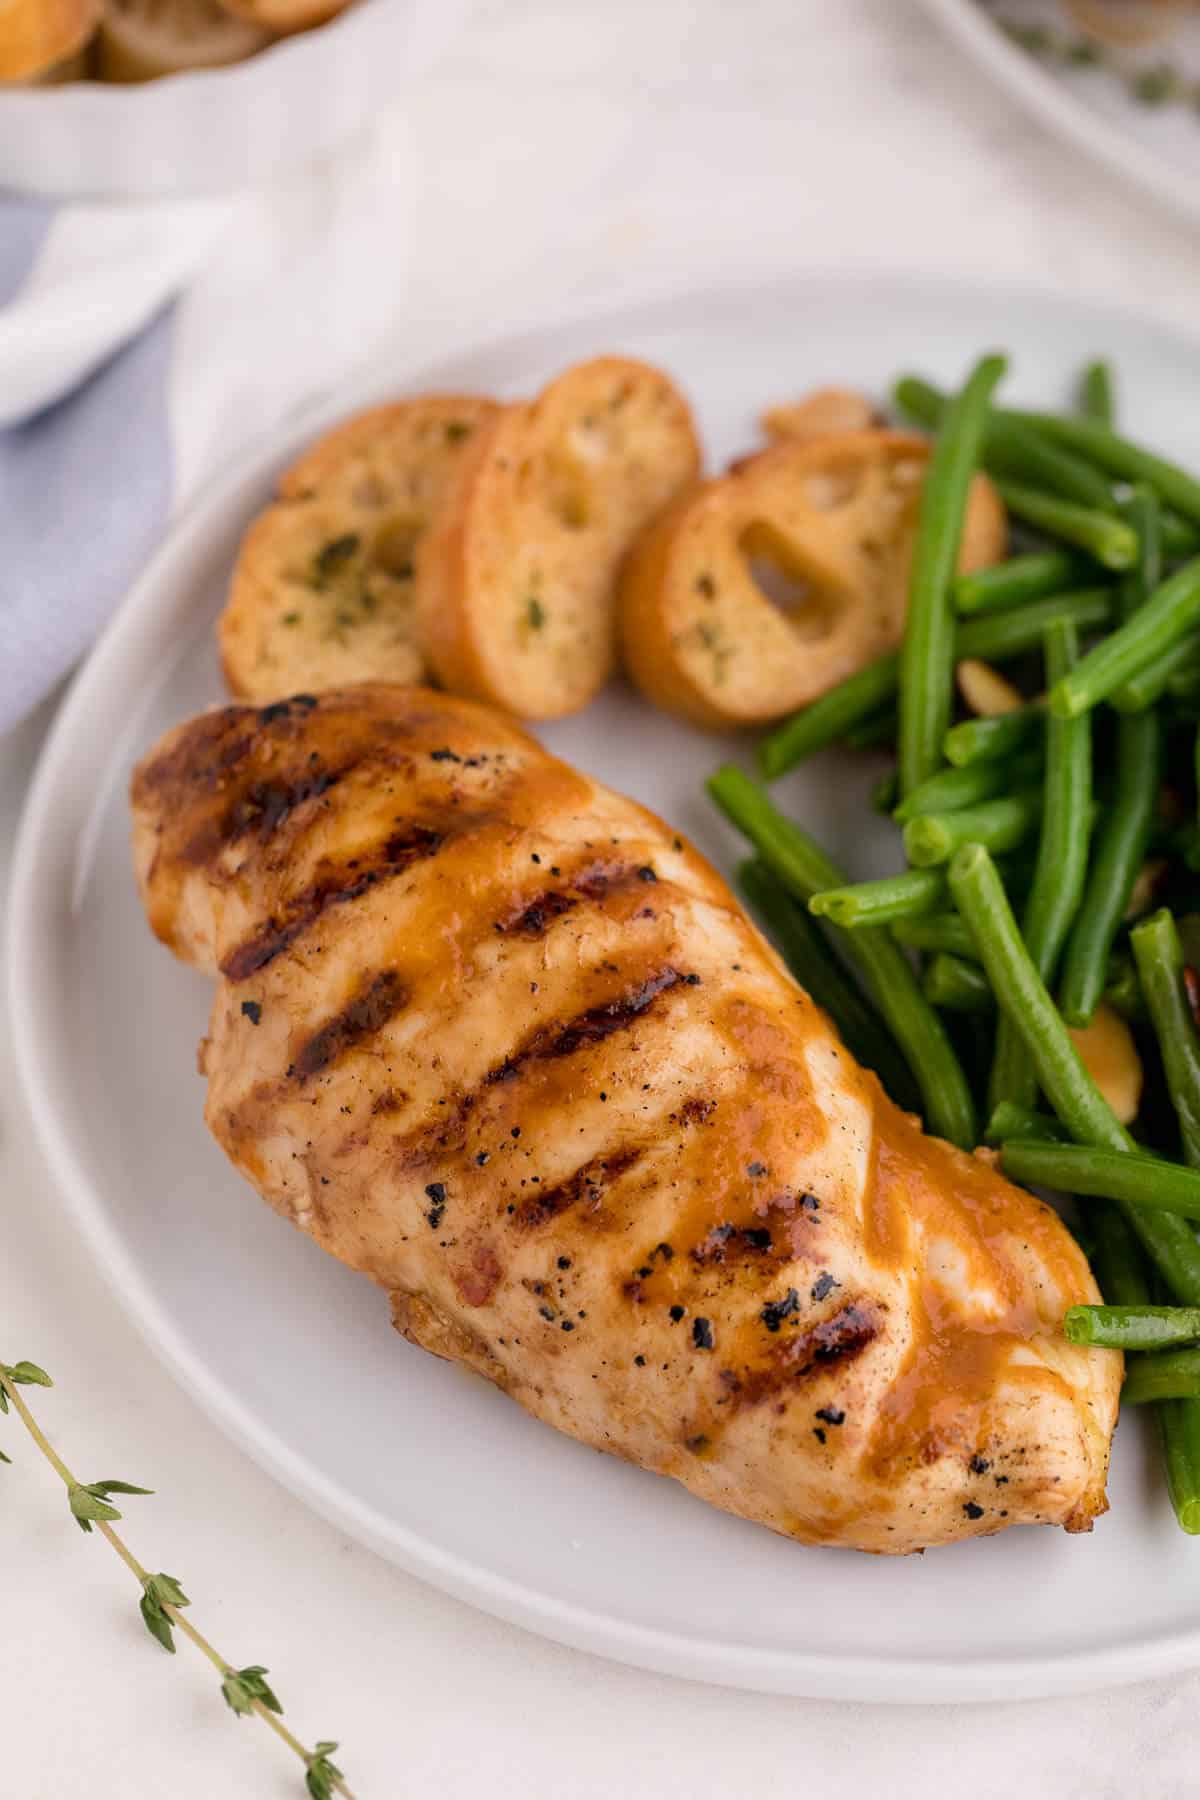 A grilled herb chicken breast on a dinner plate with slices of garlic bread and green beans.